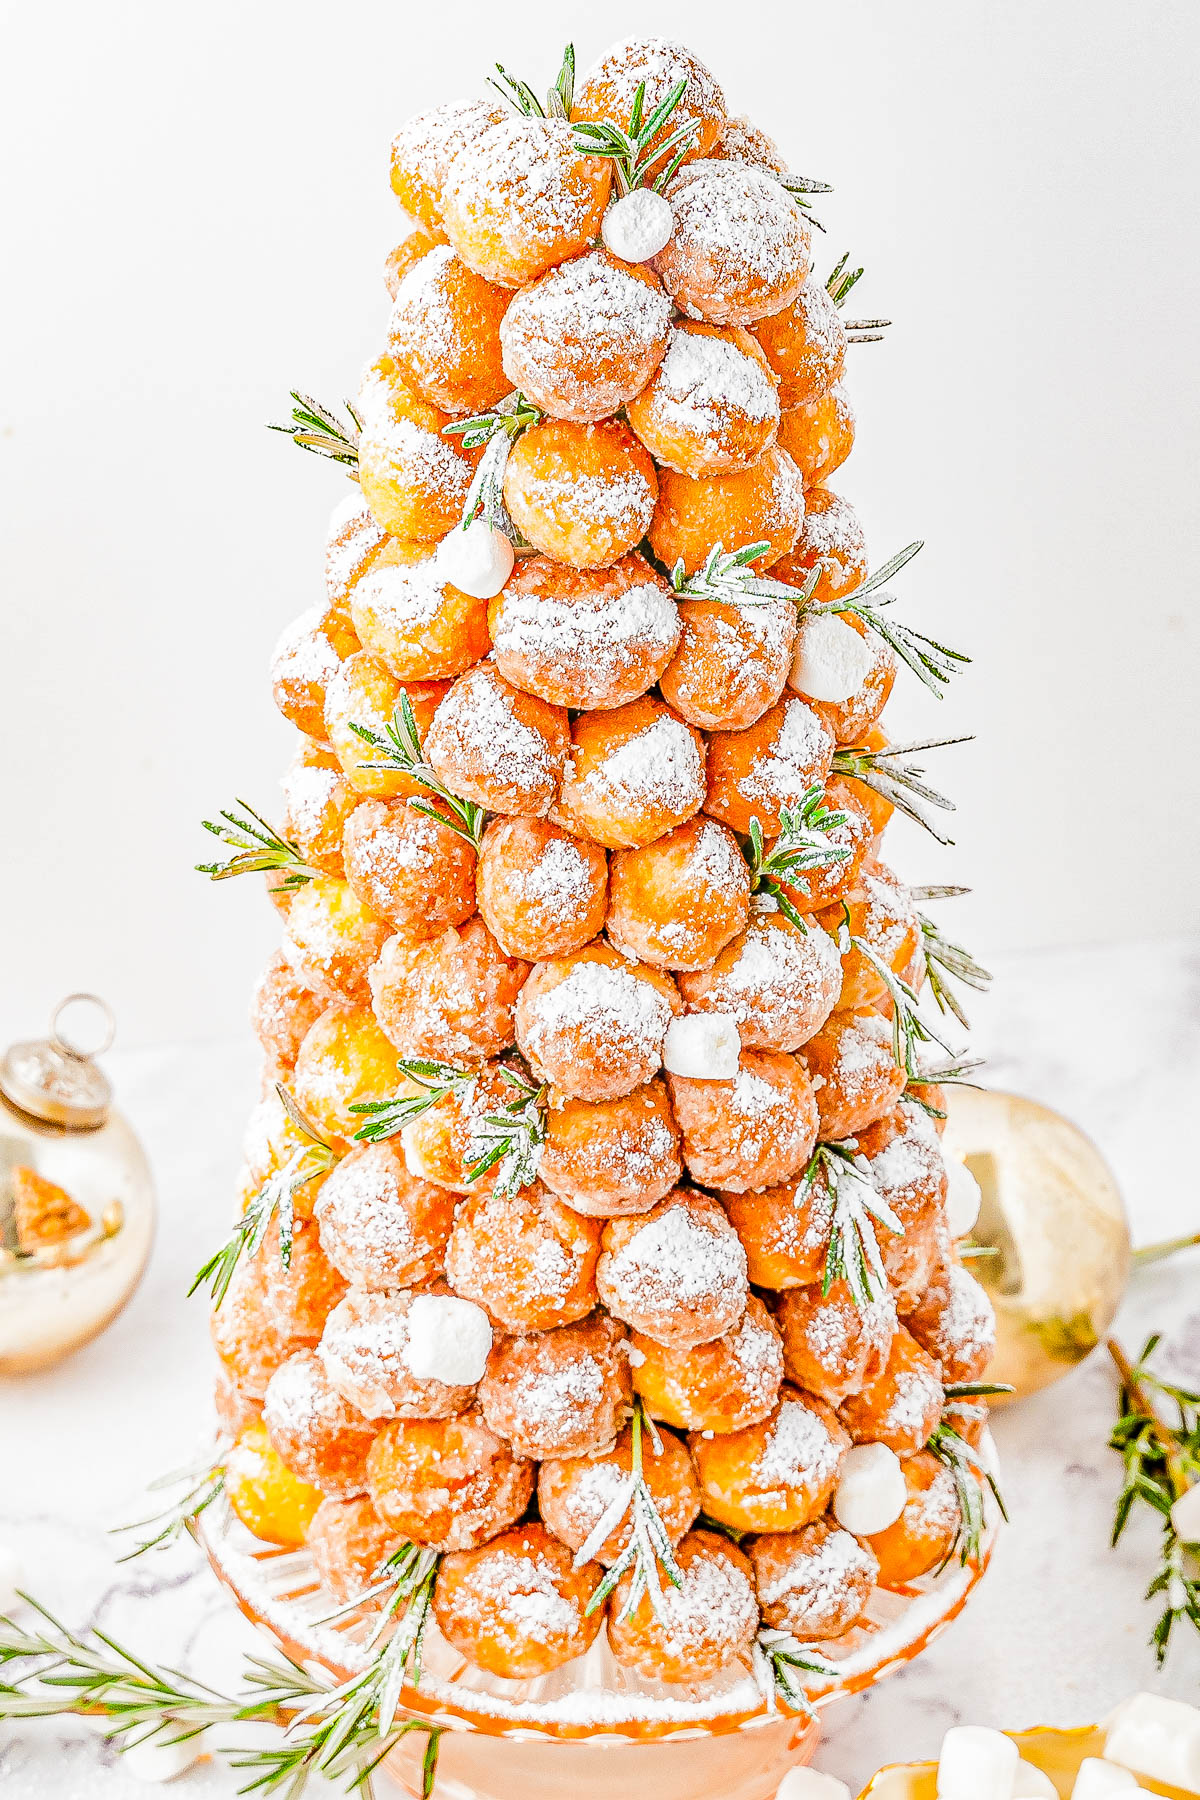 Donut Hole Christmas Tree — Looking for a QUICK and EASY, yet FESTIVE centerpiece for your holiday dessert table or brunch spread? Try making a Christmas tree out of donut holes! All you need is a styrofoam cone from the craft store and some store-bought donut holes. Decorate your tree however you want, then let guests help themselves! 